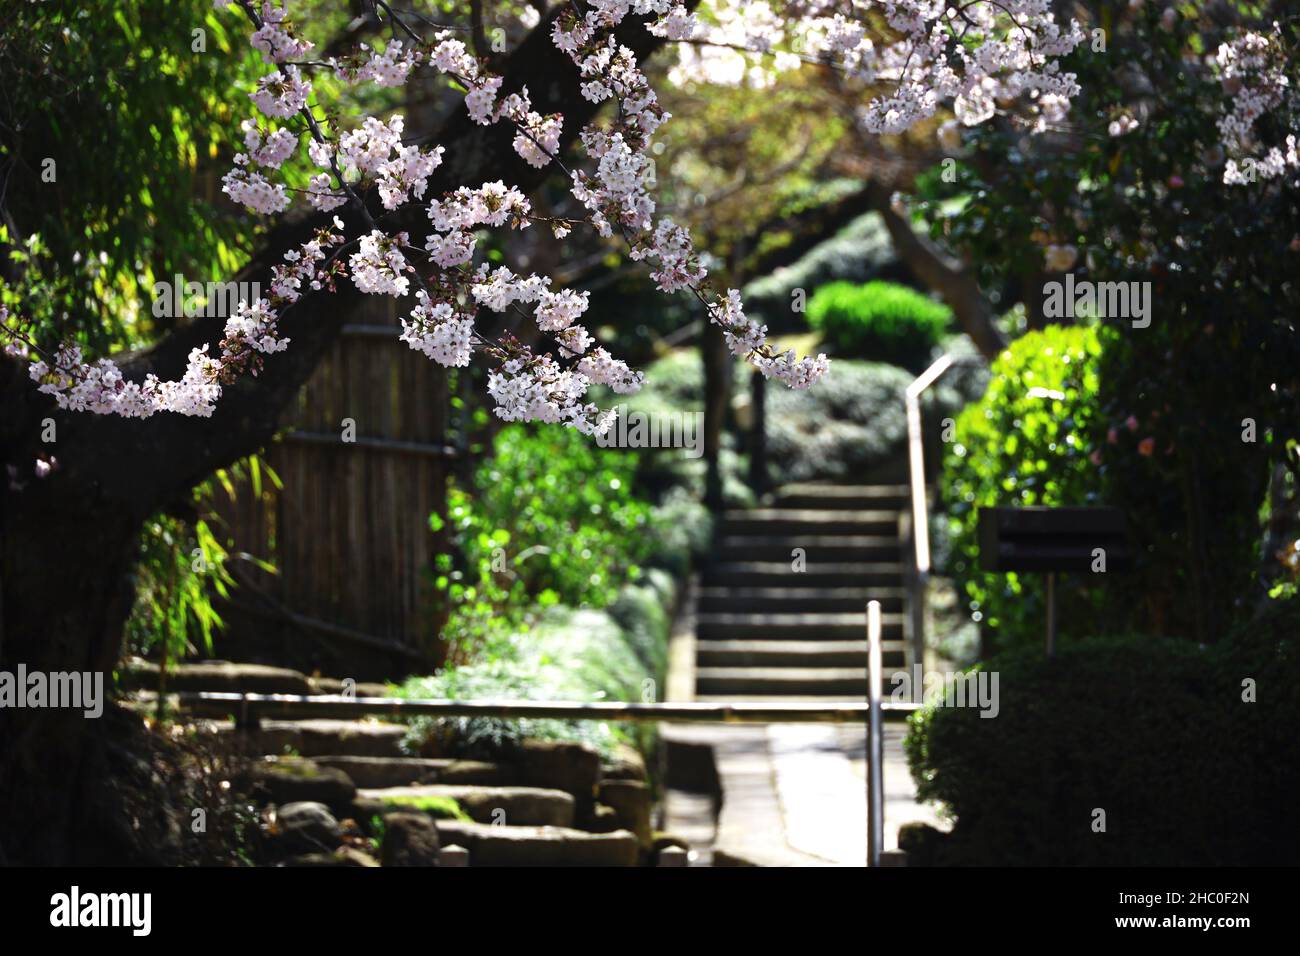 Scenery of Kamakura, the ancient capital of Japan where cherry blossoms bloom Stock Photo